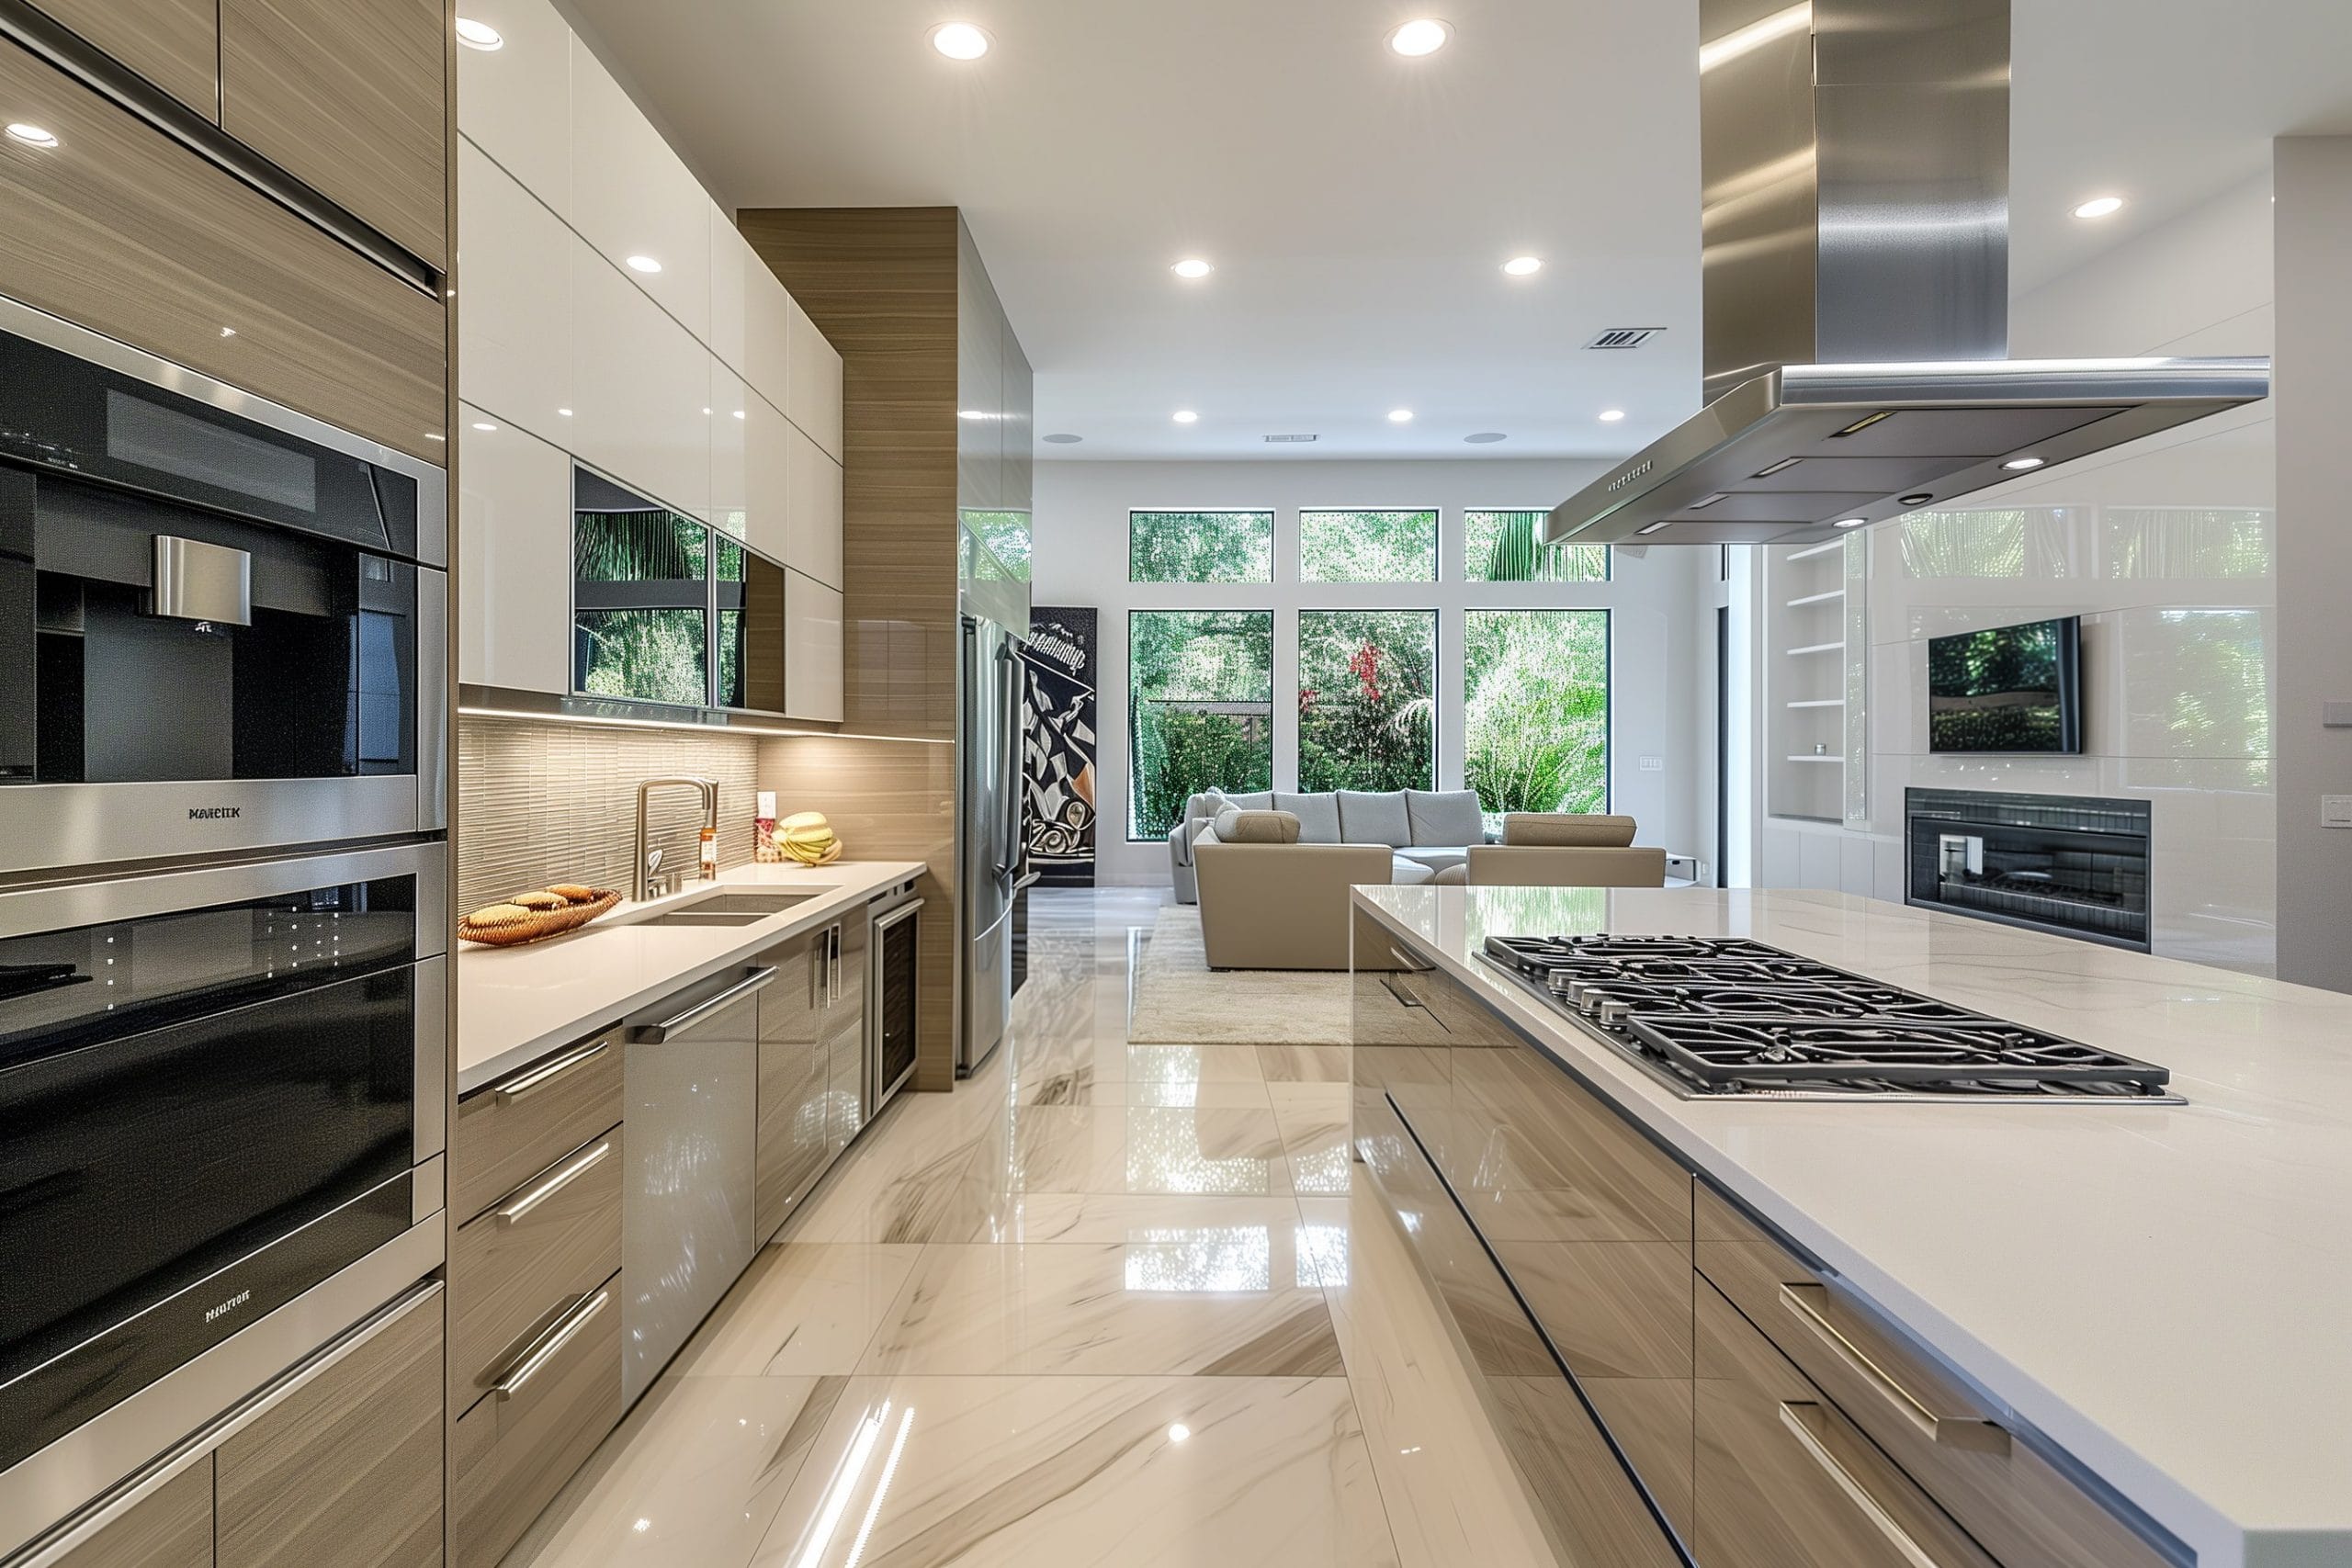 Kitchen Countertop Ideas: Stylish Surfaces to Elevate Your Space